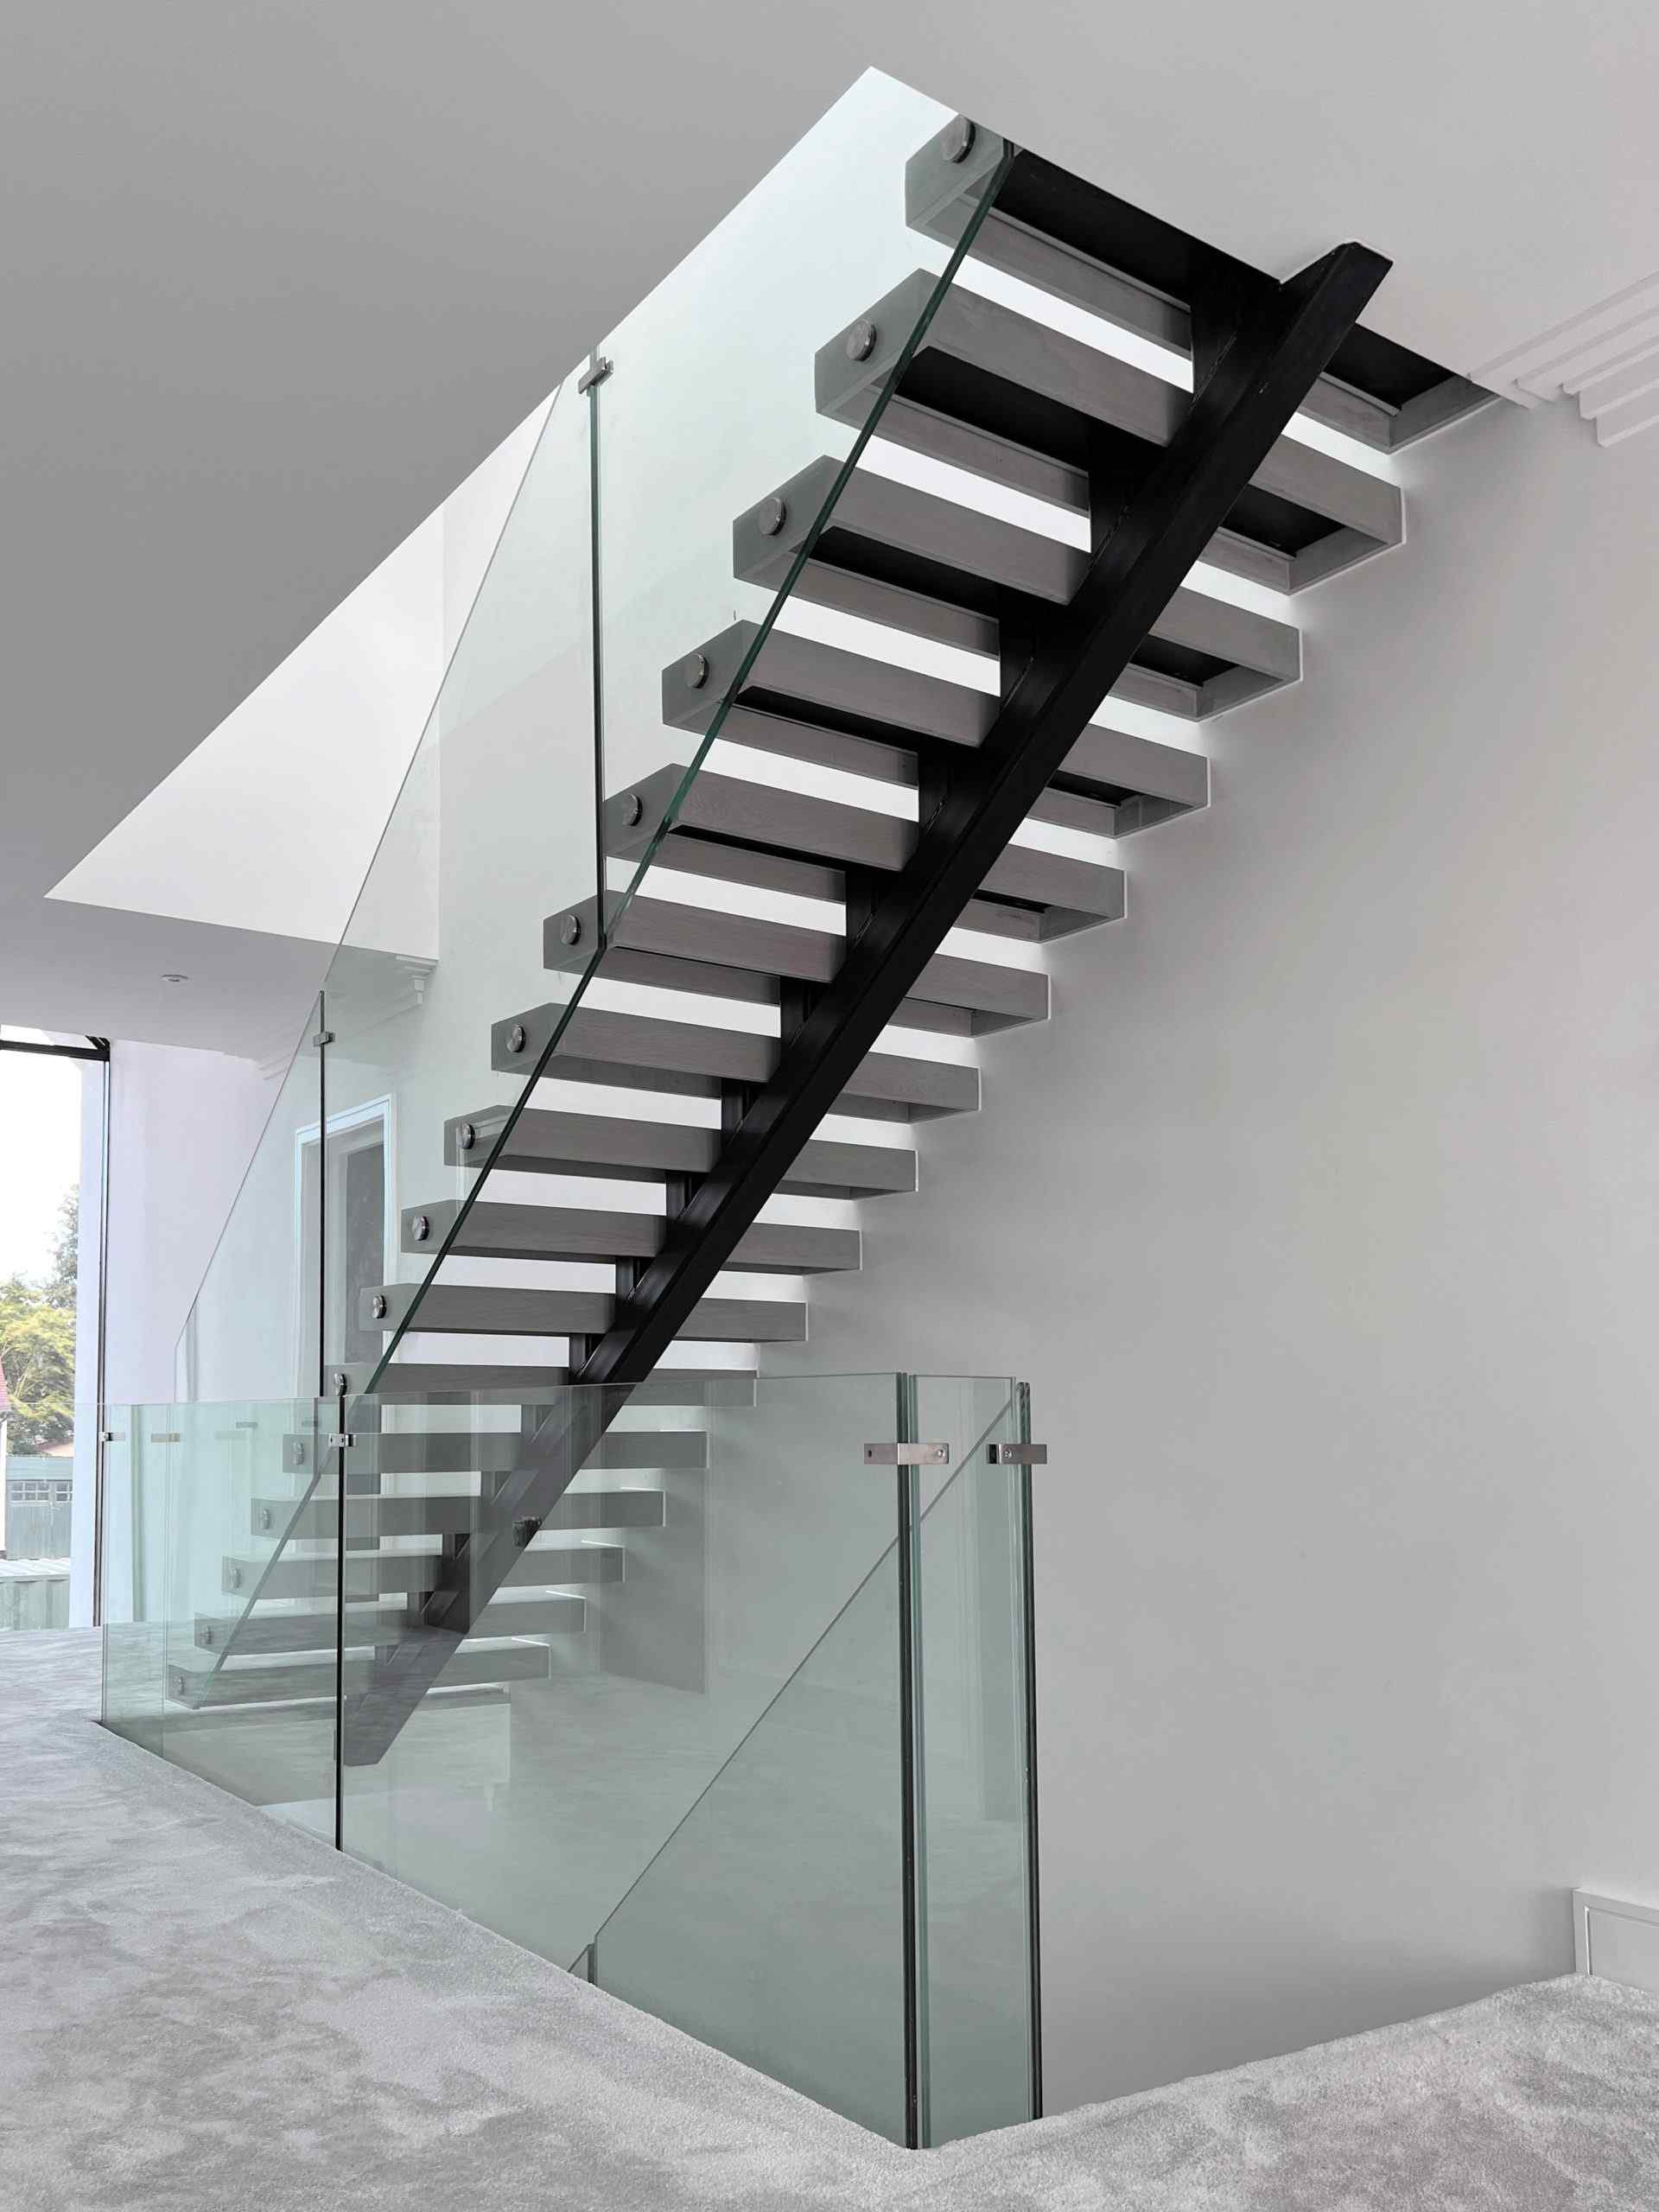 Bottom view of spine staircase with glass balustrade